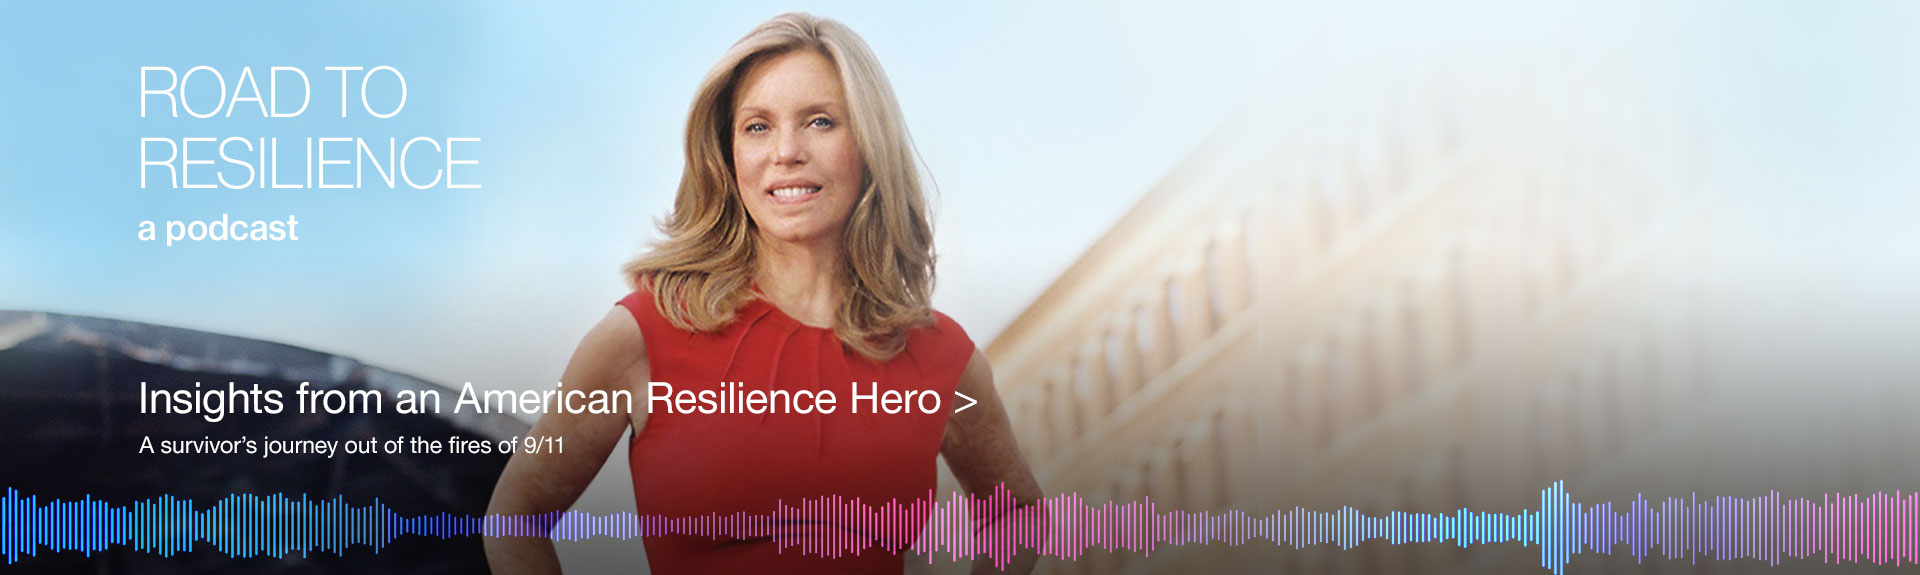 Insights from an American Resilience Hero